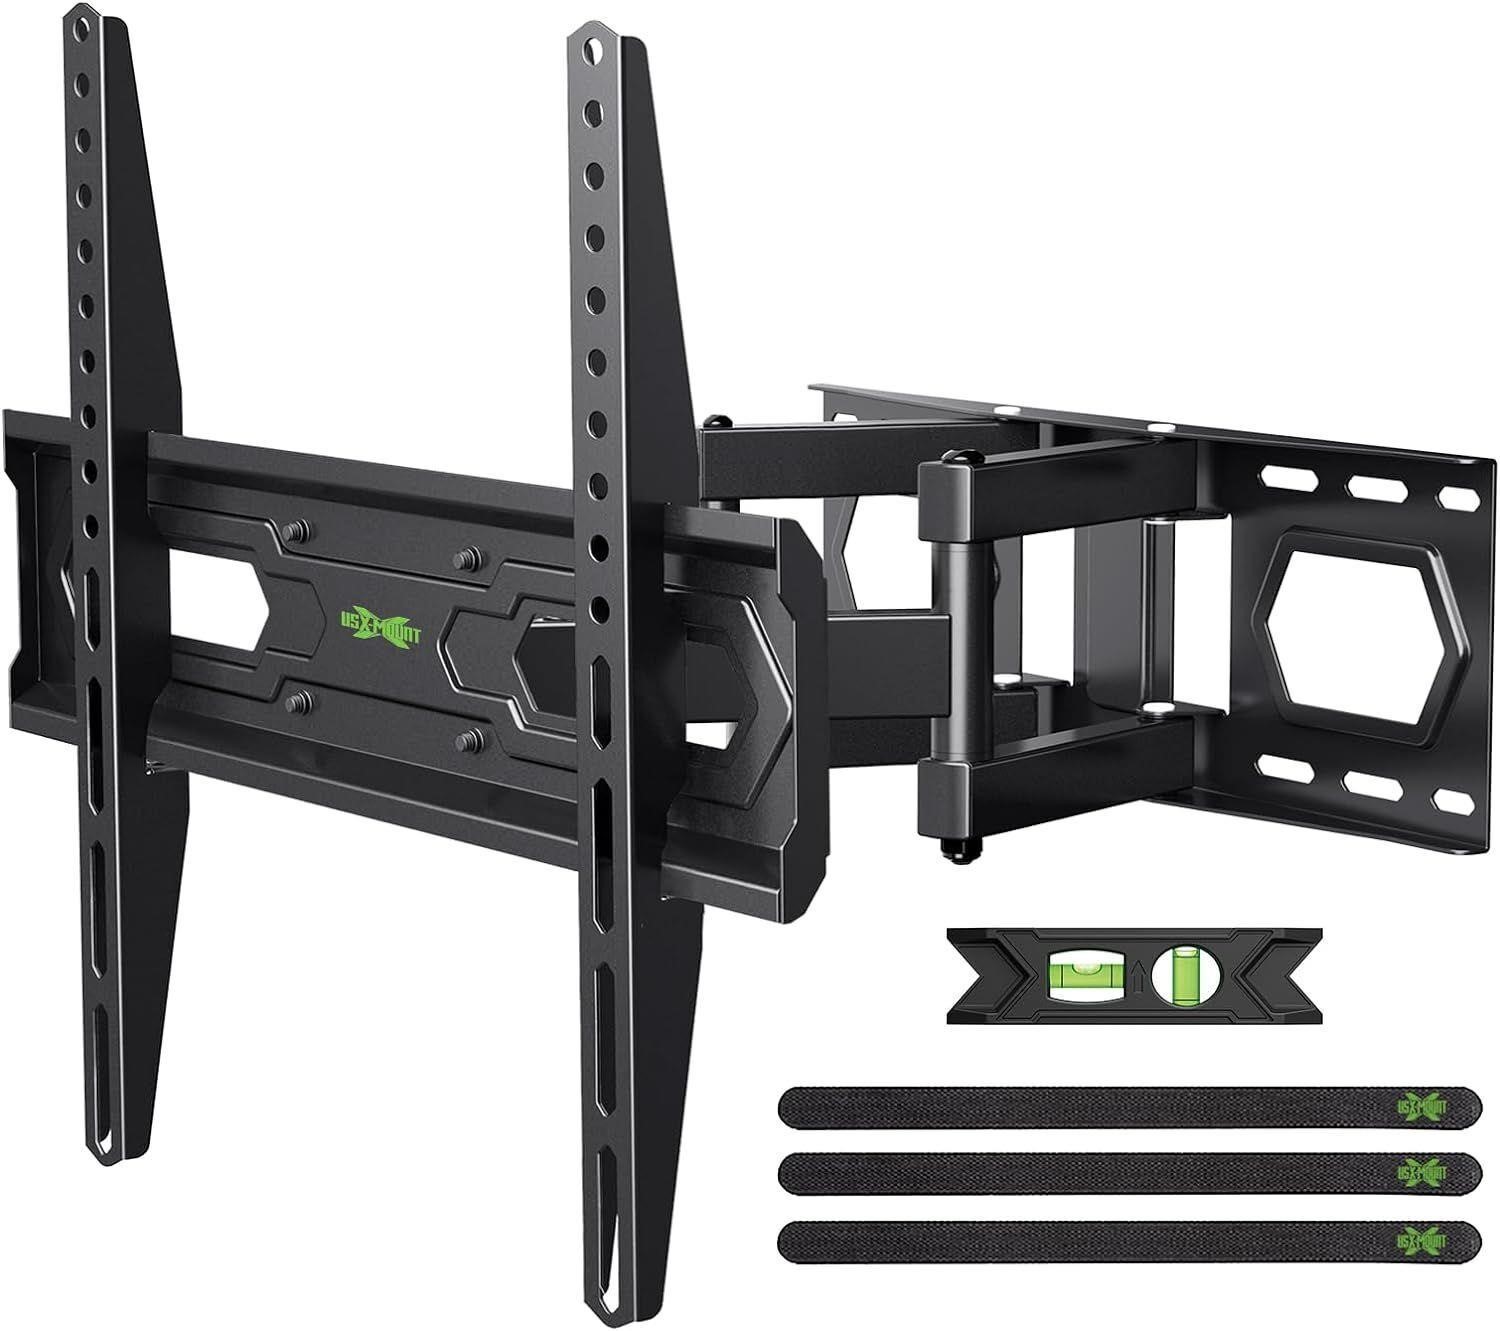 USX MOUNT TV Wall Mount for 32-65 inch